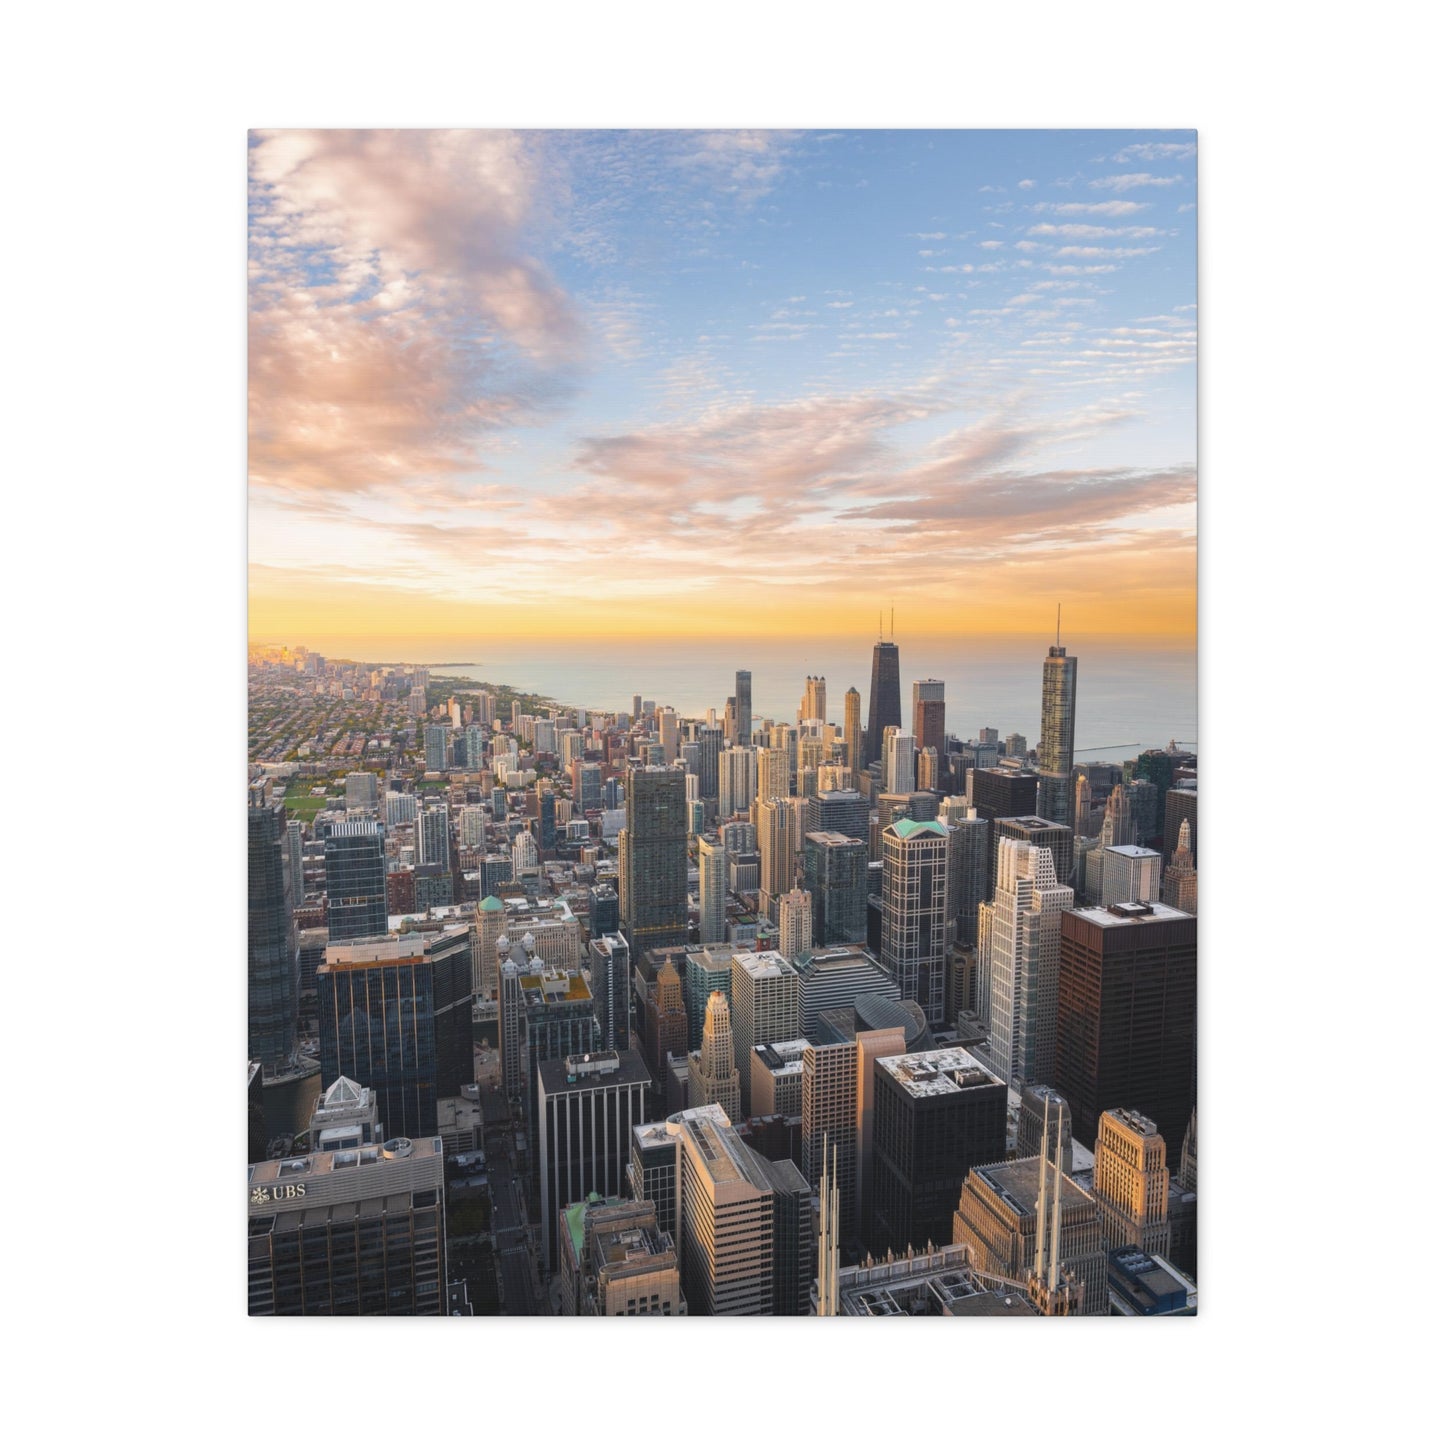 Chicago Skyline Sunset Over Lake Michigan - Canvas Wall Print (Free Shipping)